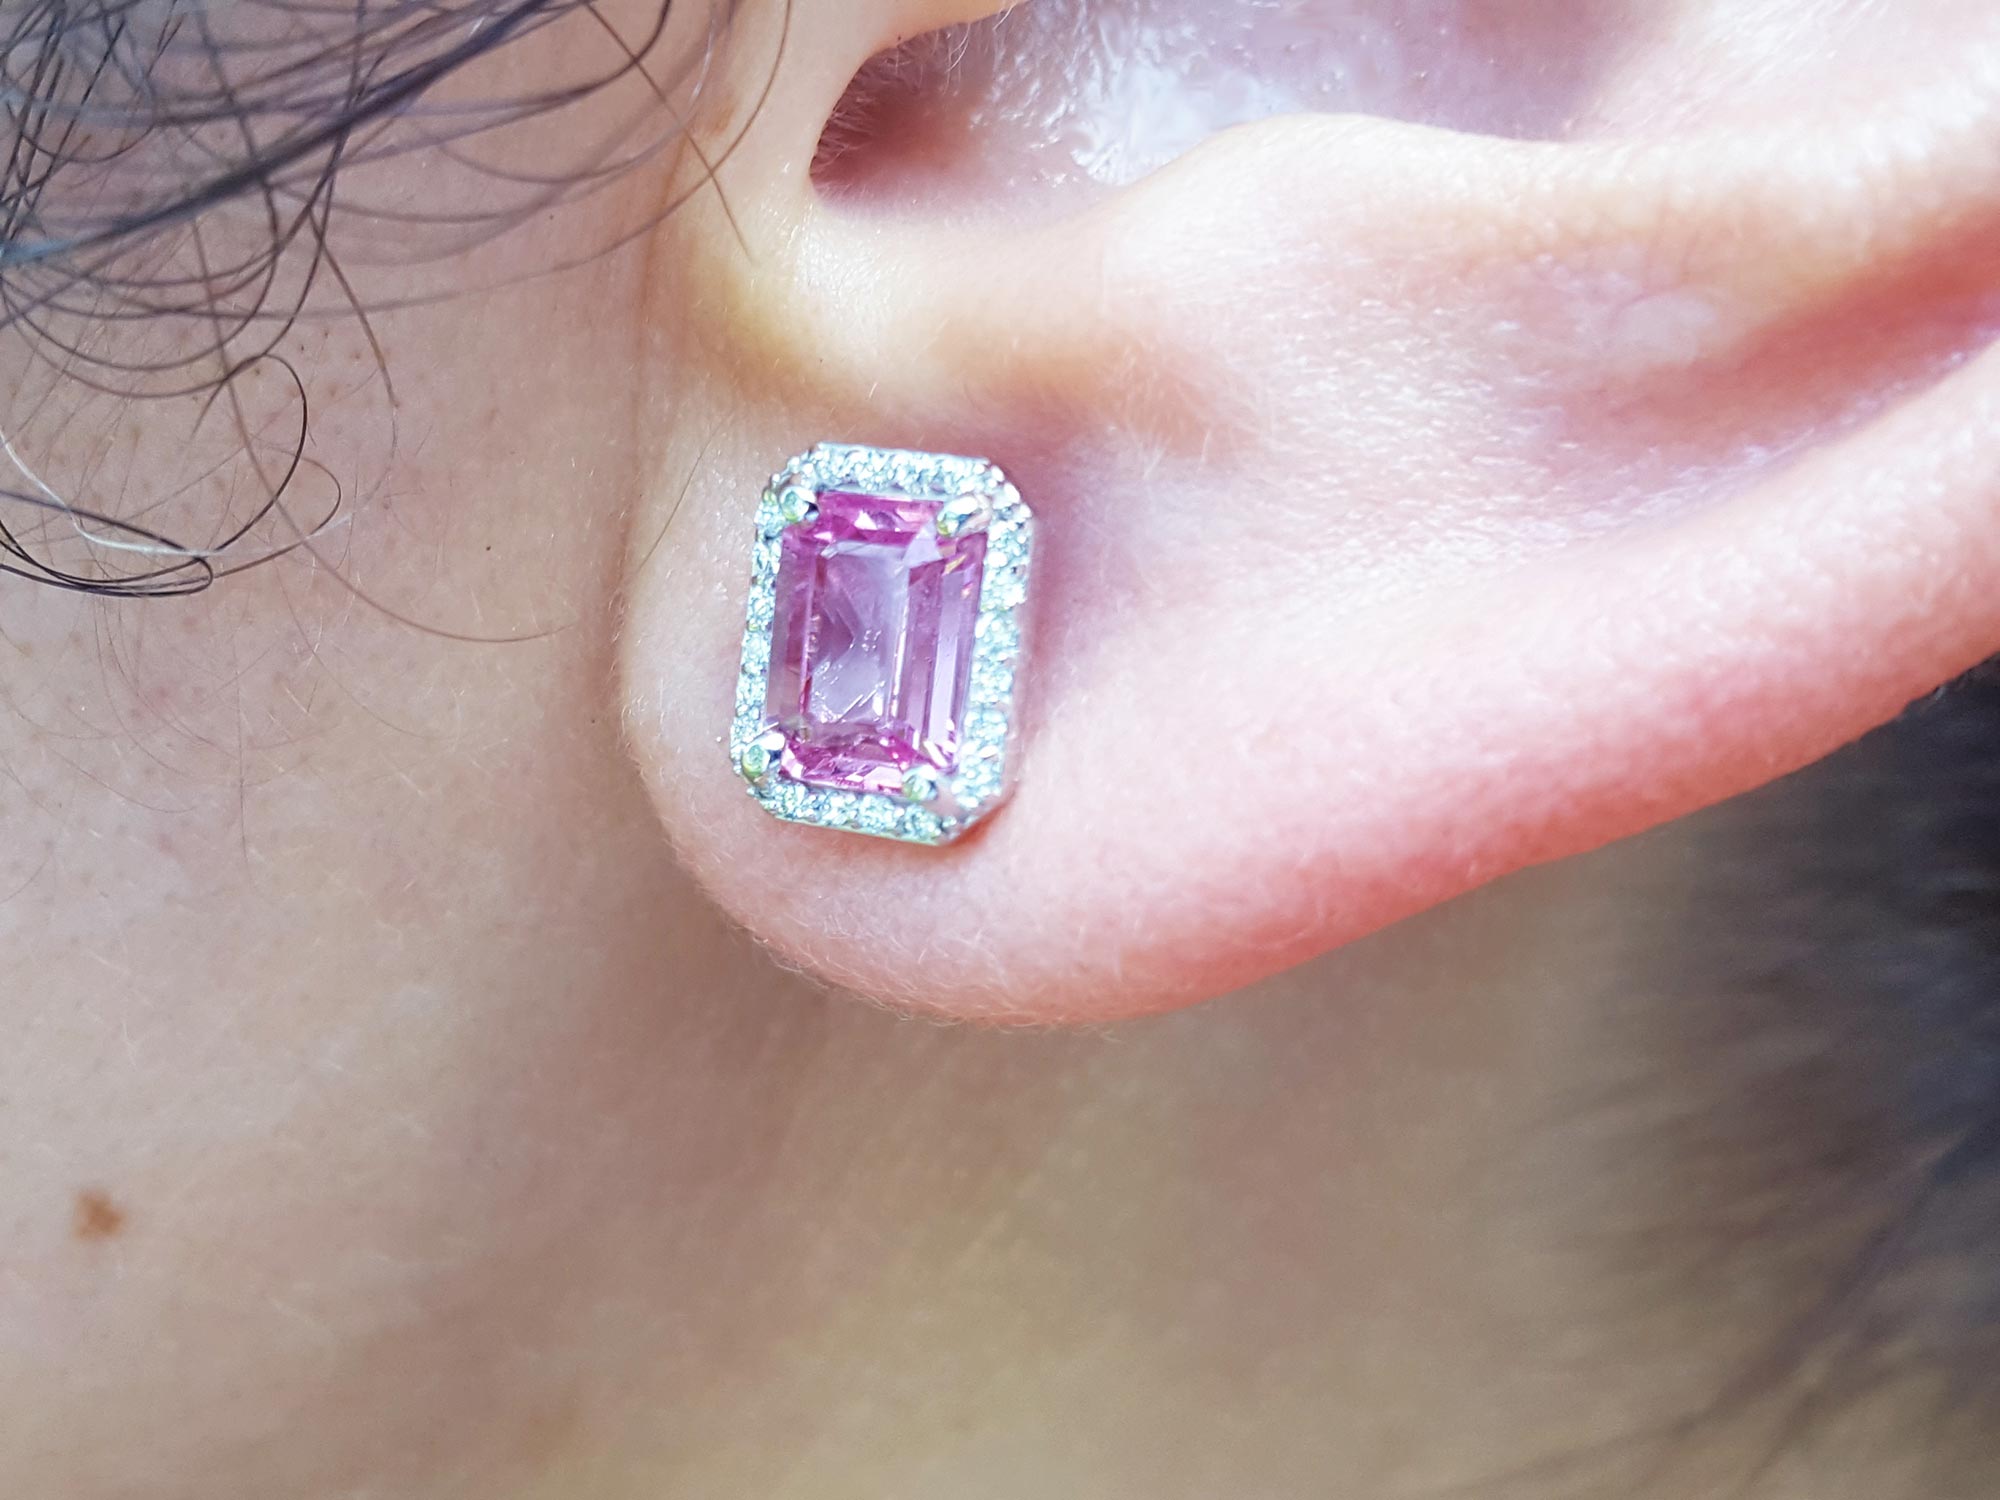 White gold pink sapphire earrings